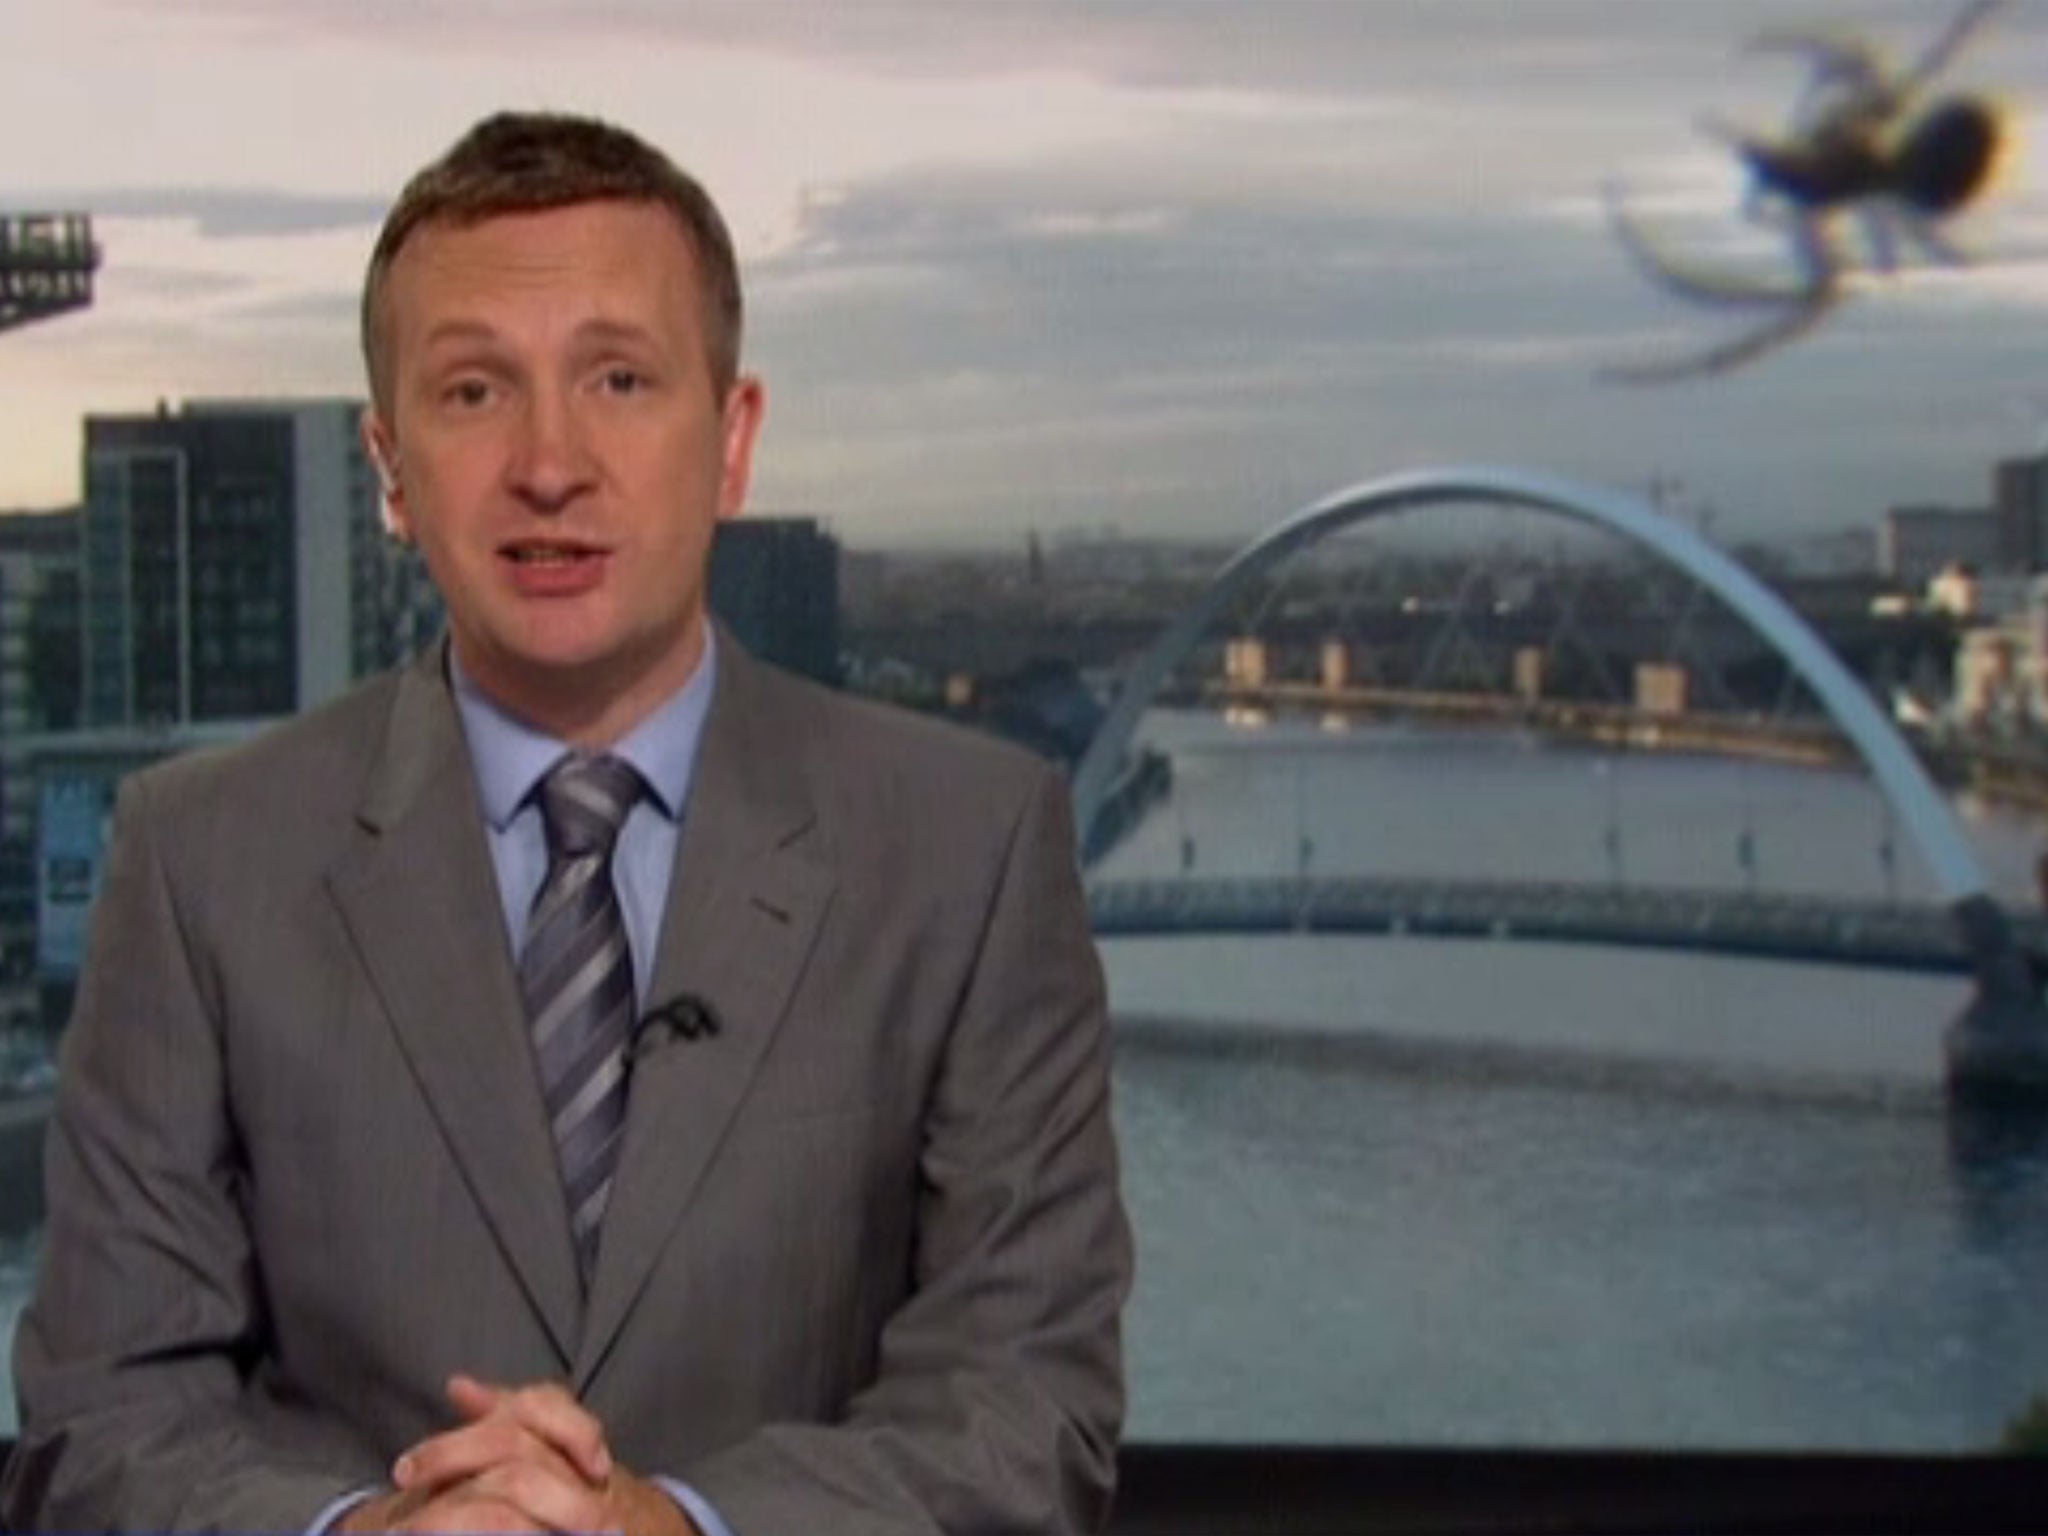 A spider has appeared on the screen of a BBC Scotland news bulletin.